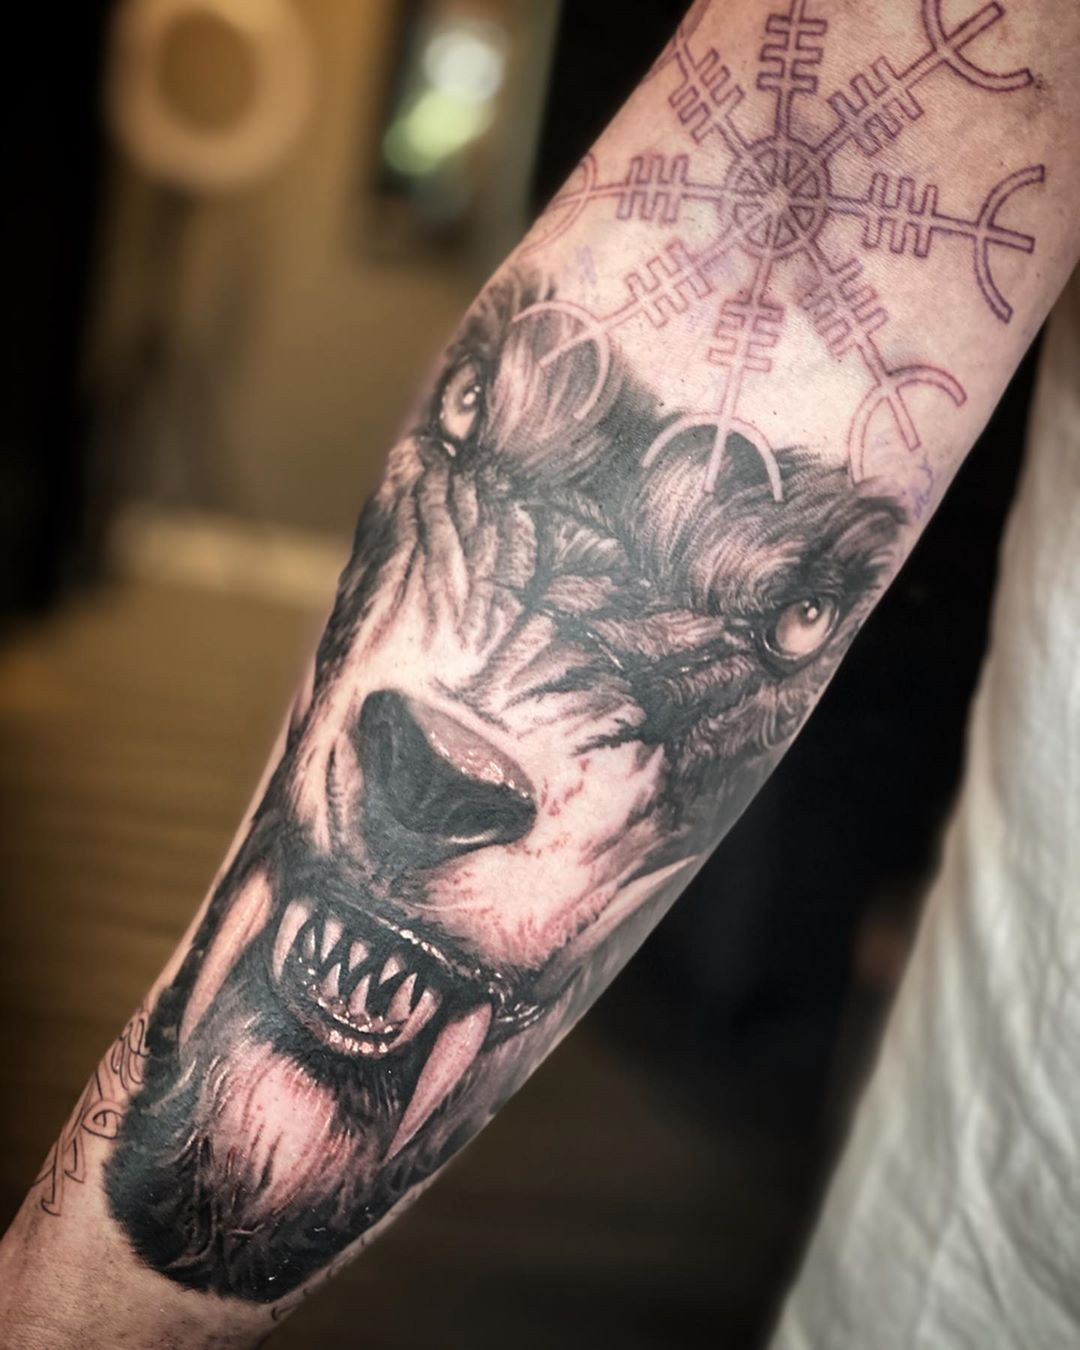 The 50 Best Wolf Tattoos for Men,wolf tattoos for females,wolf tattoo forearm,wolf tattoos meaning,wolf tattoo design